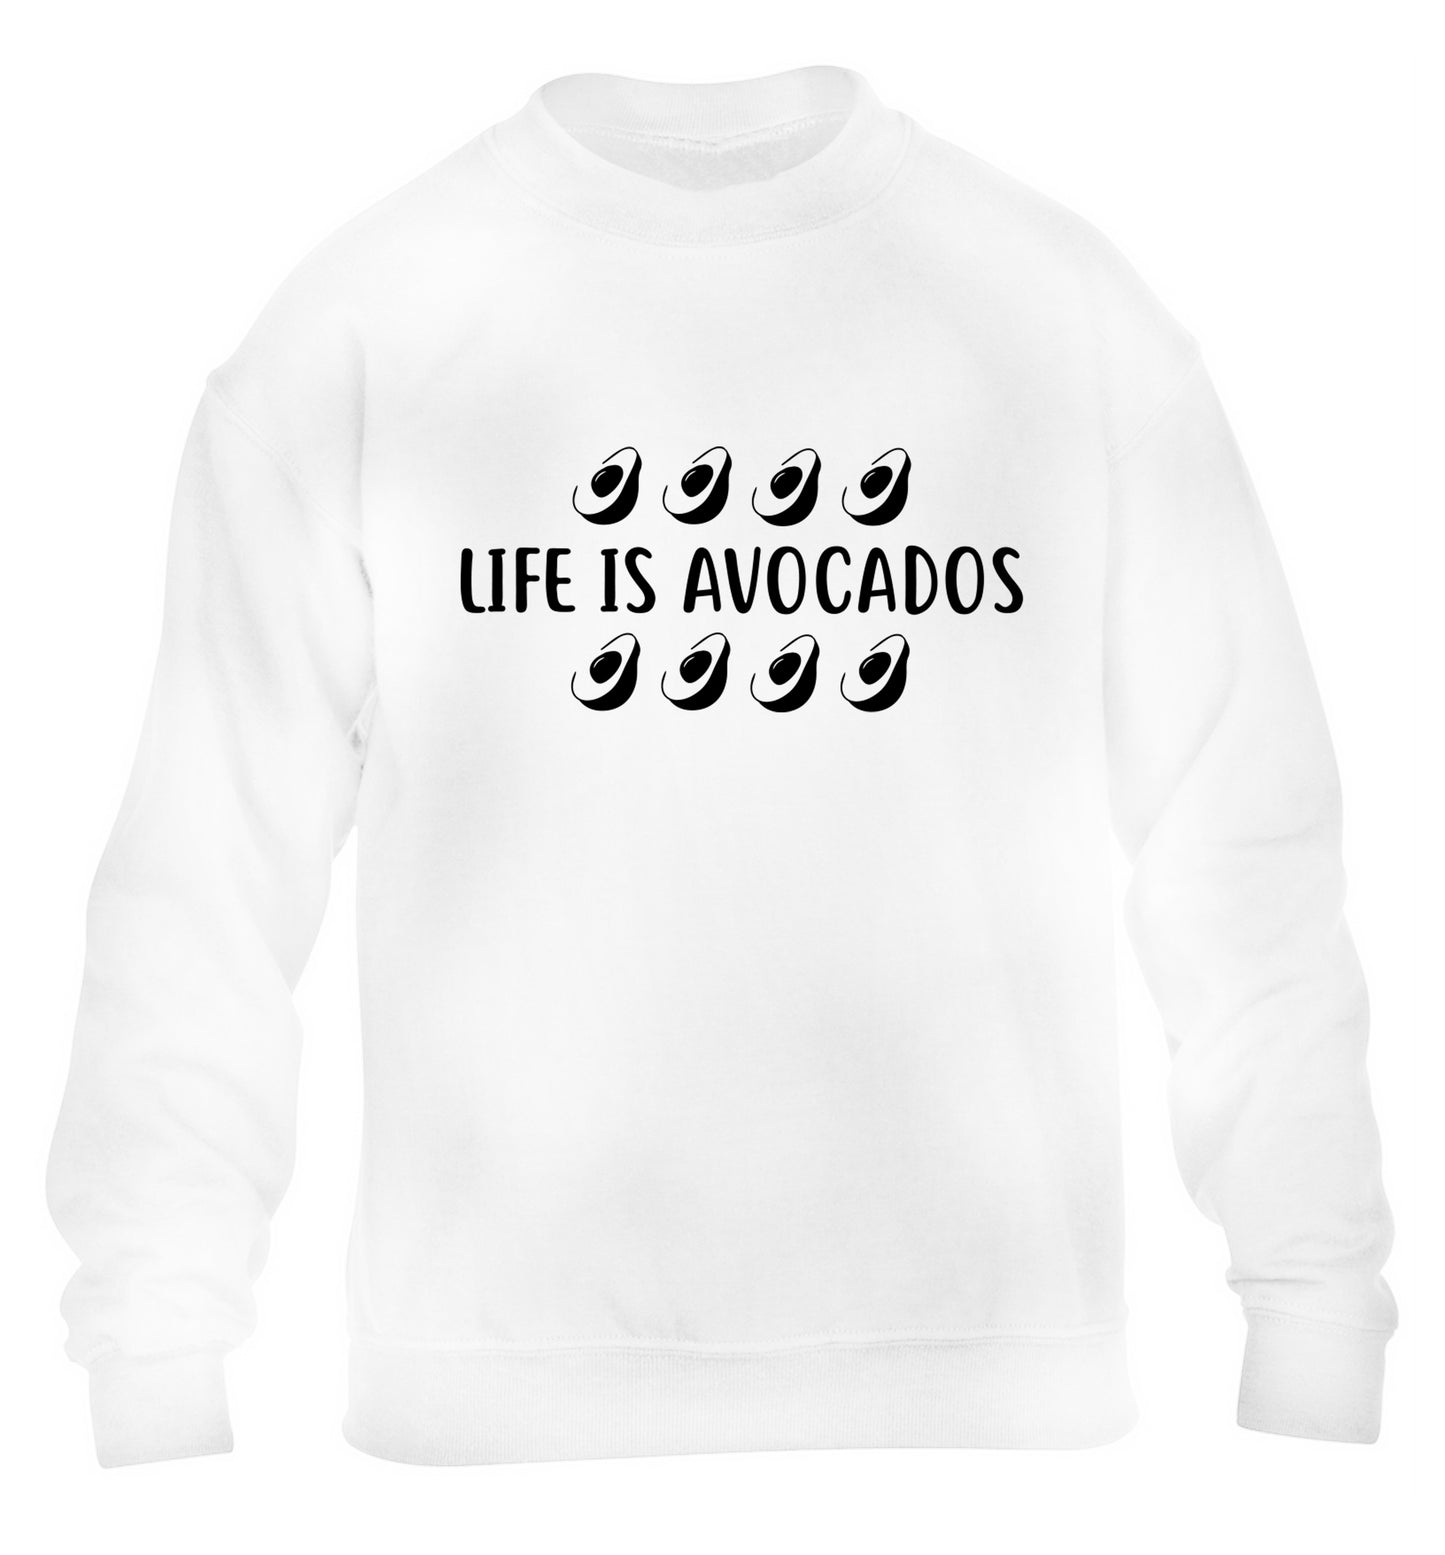 Life is avocados children's white sweater 12-14 Years